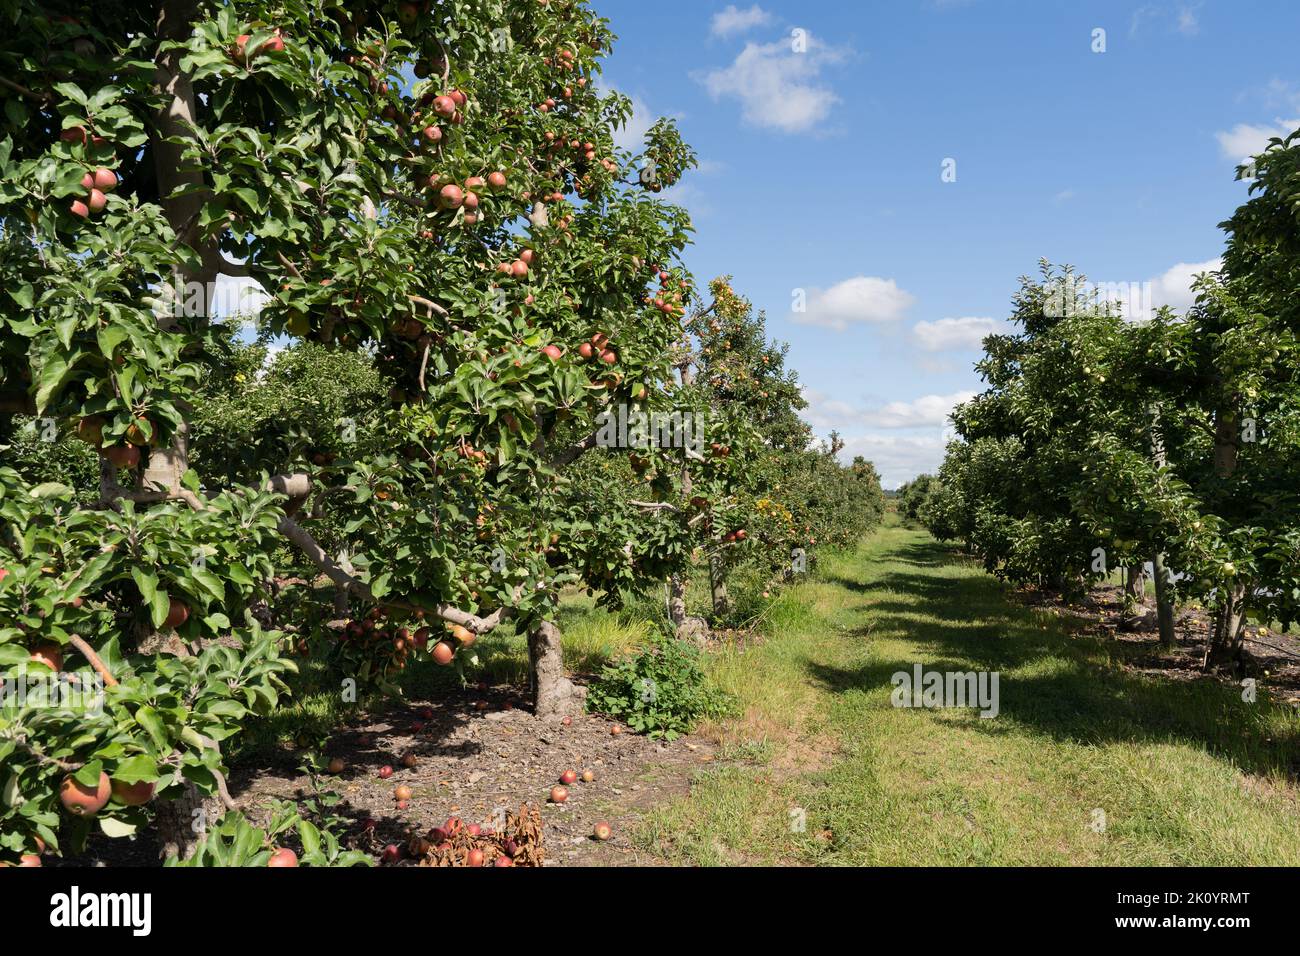 Rows of Apple trees with ripe apples ready to harvest at Orchard Stock Photo